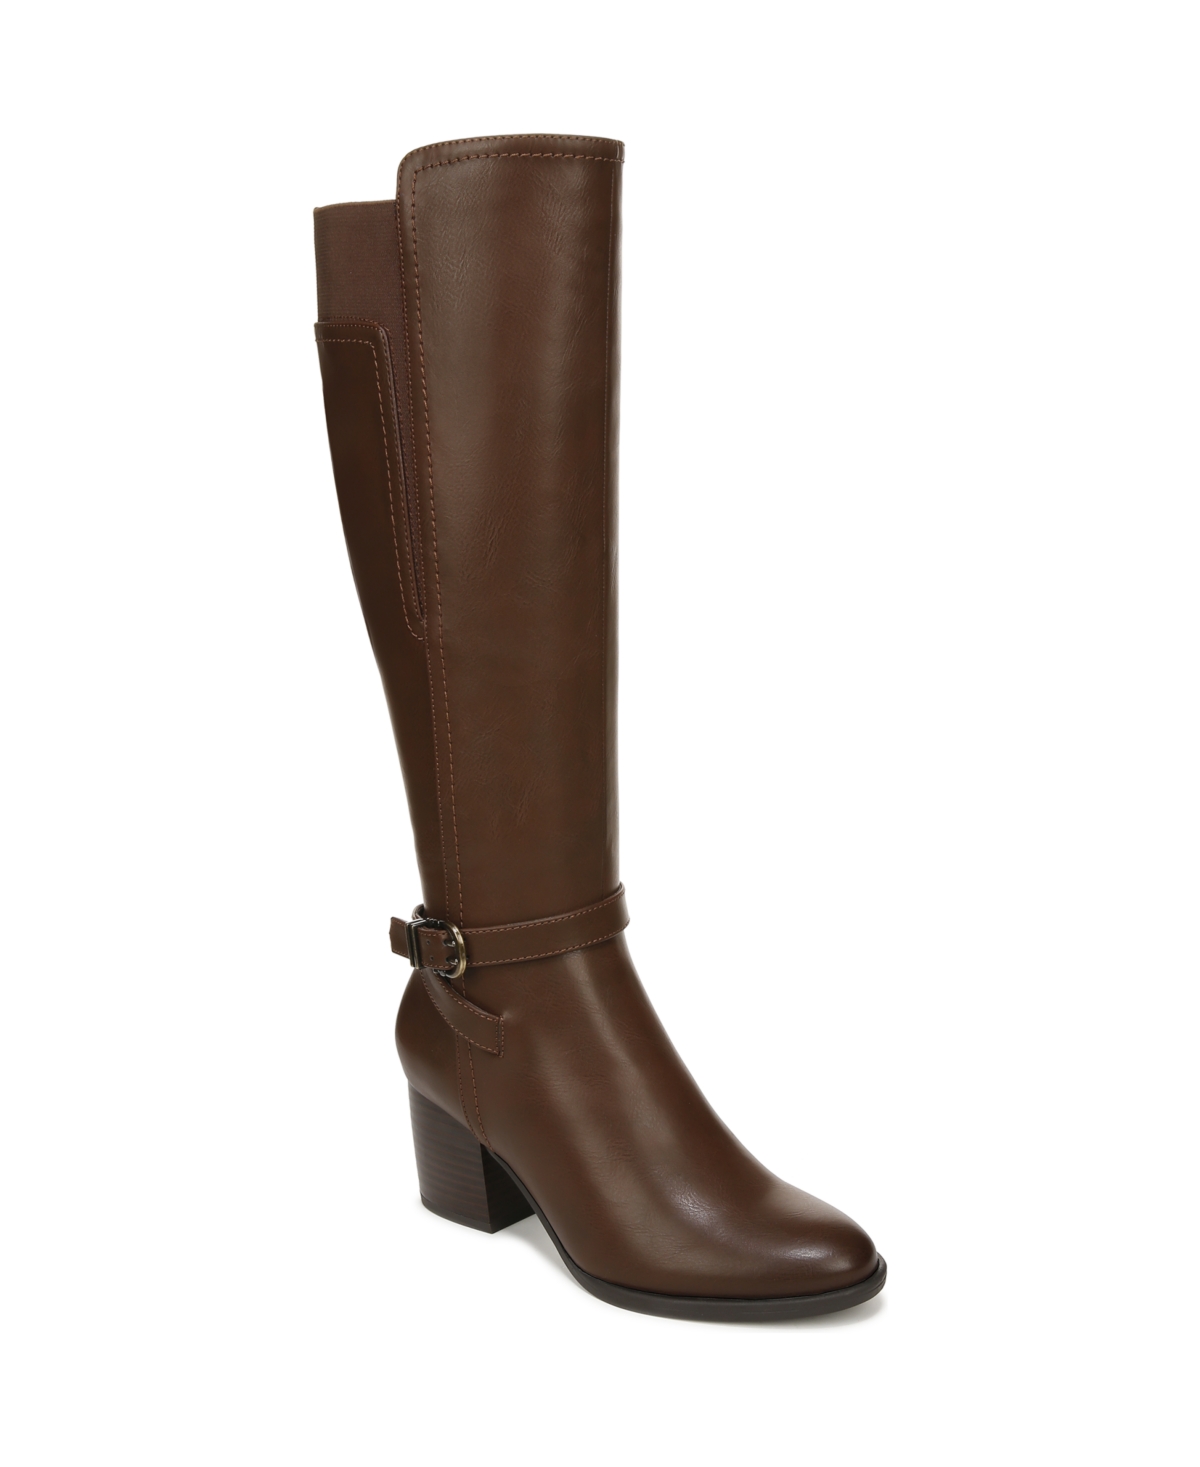 Uptown Knee High Boots - Dark Brown Faux Leather